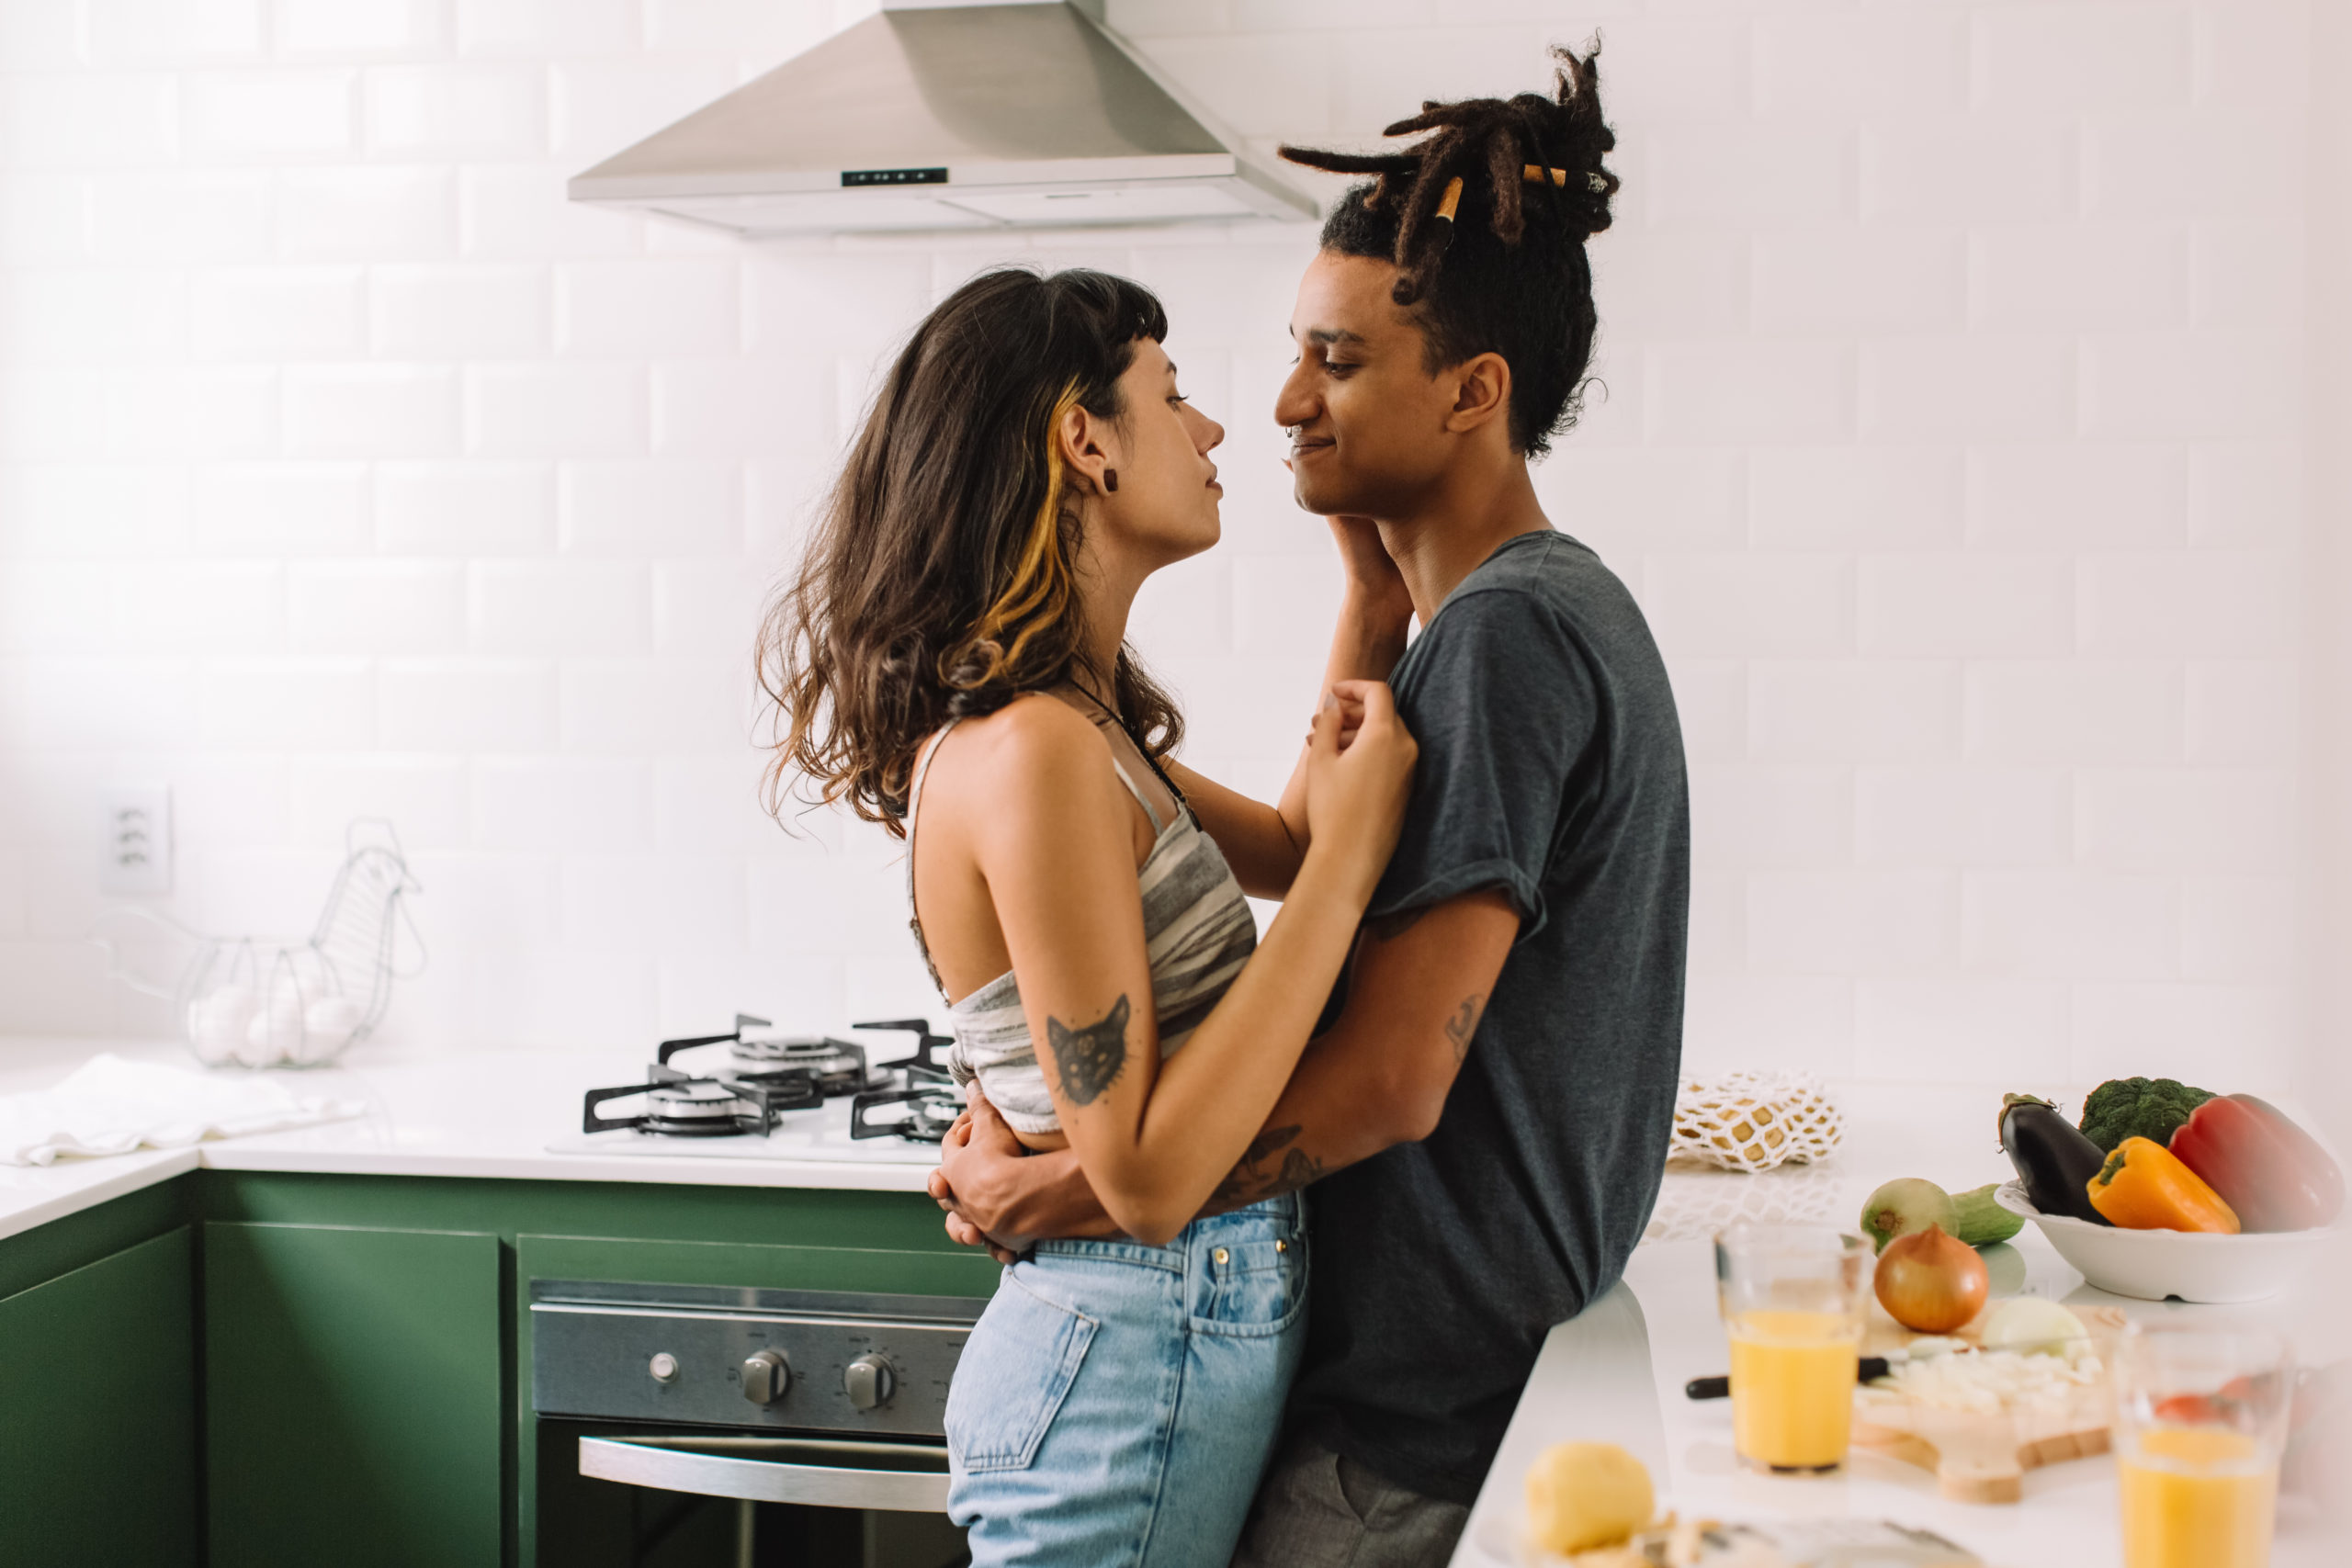 Beautiful young couple bonding in the kitchen. Cropped shot of an affectionate young couple embracing each other while standing together in their kitchen. Couple sharing a romantic moment at home.